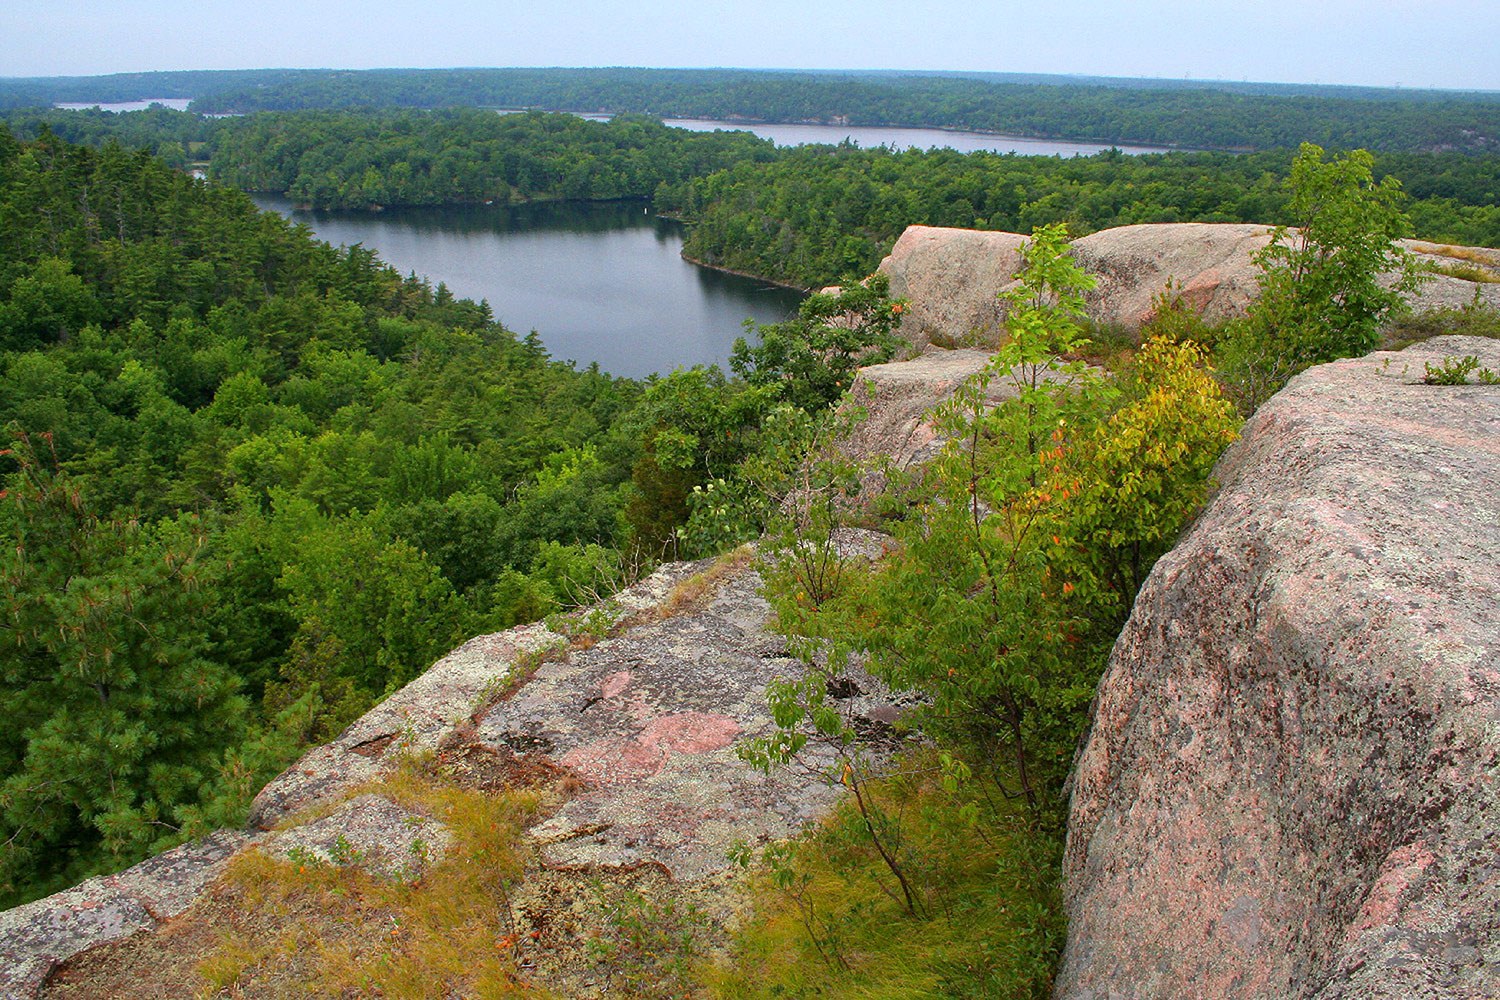 View of the Rideau Waterway from Rock Dunder